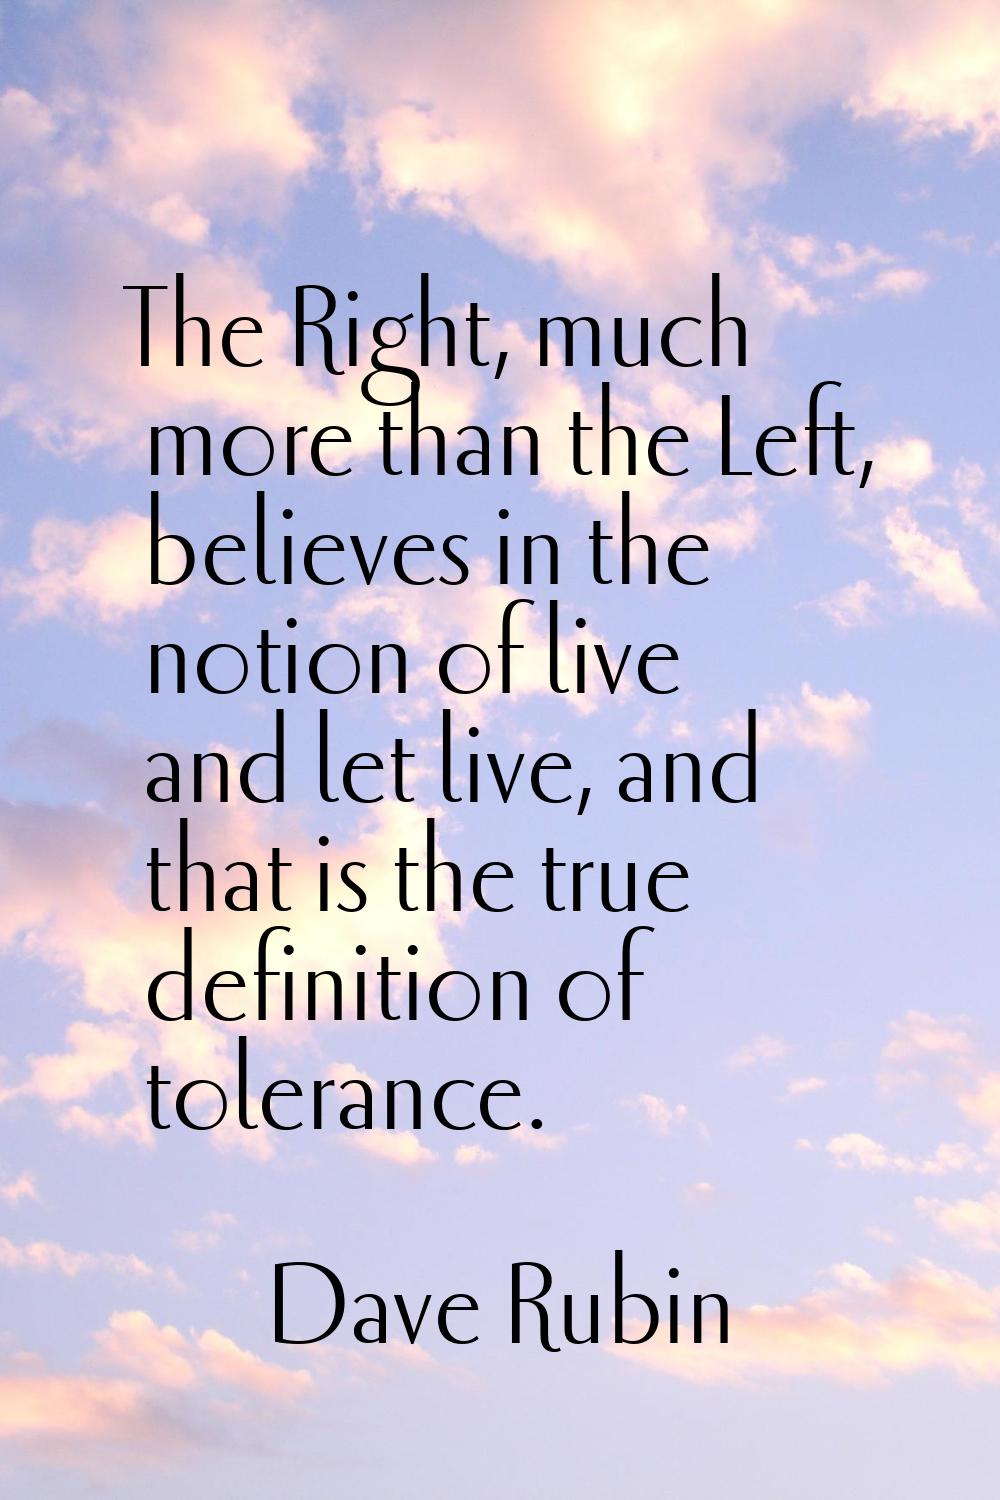 The Right, much more than the Left, believes in the notion of live and let live, and that is the tr